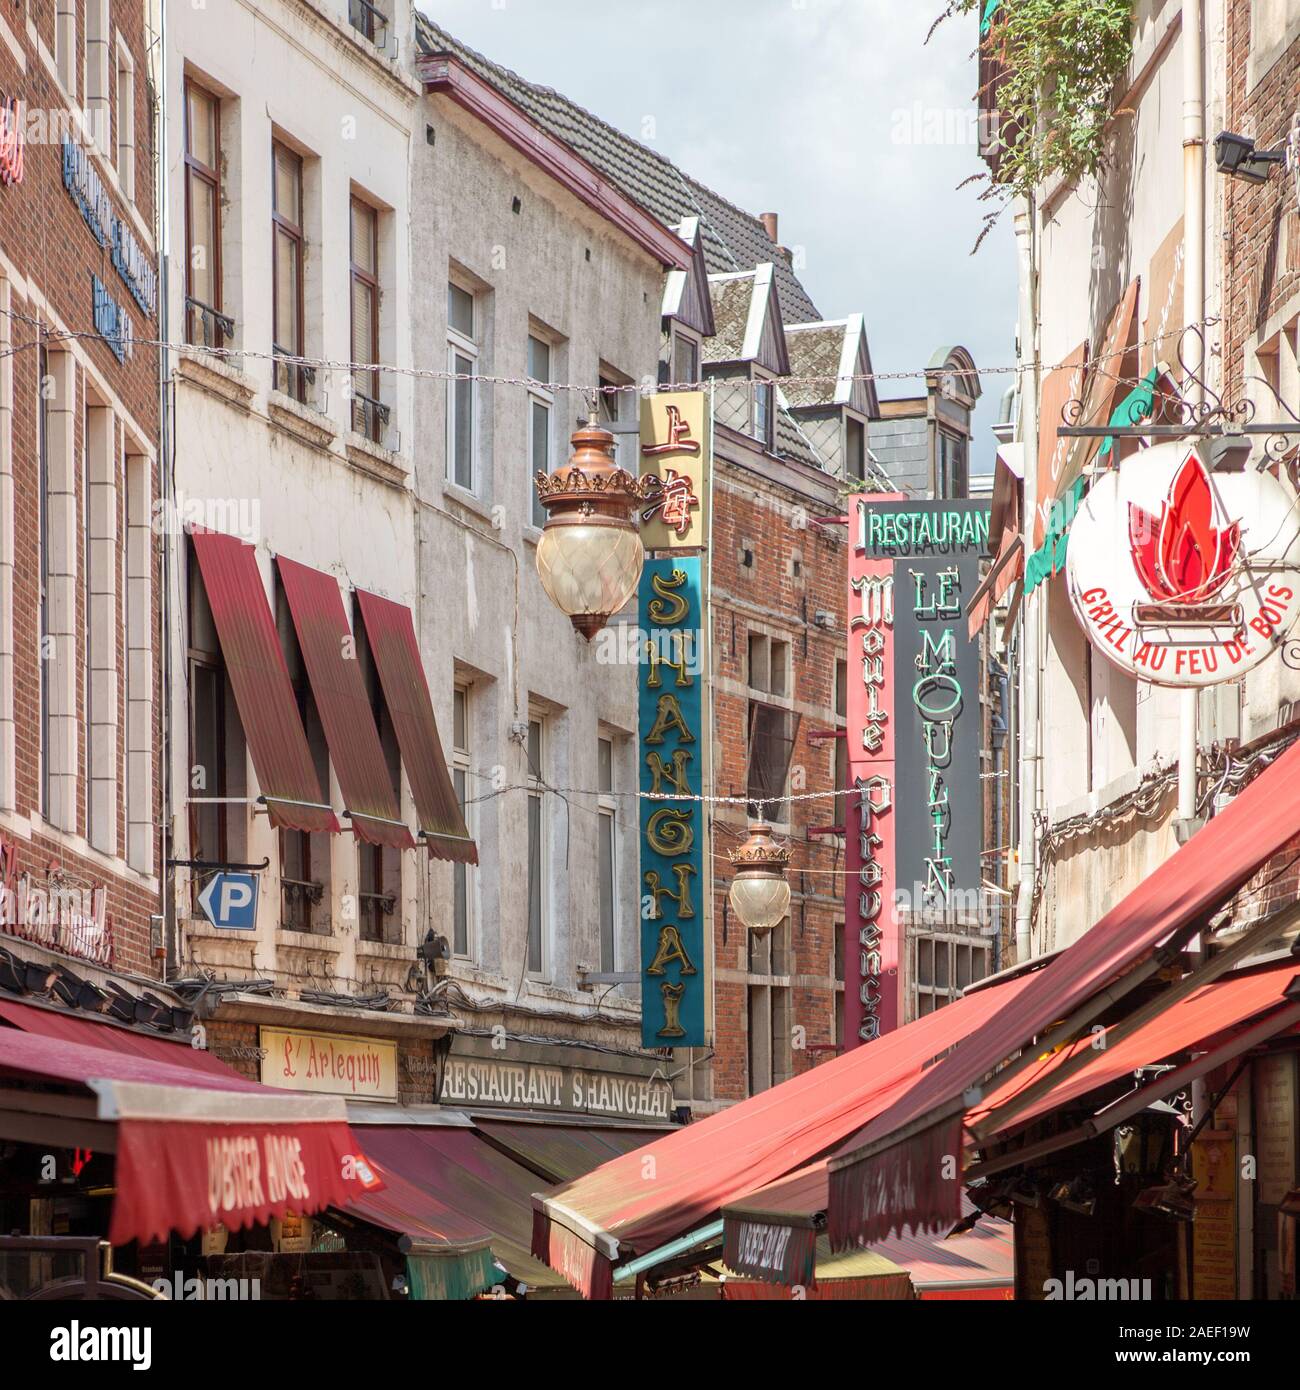 BRUSSELS, BELGIUM -February 17, 2014: famous street Ilot Sacré (also known as The Belly of Brussels) with many restaurants in Brussels, Belgium Stock Photo